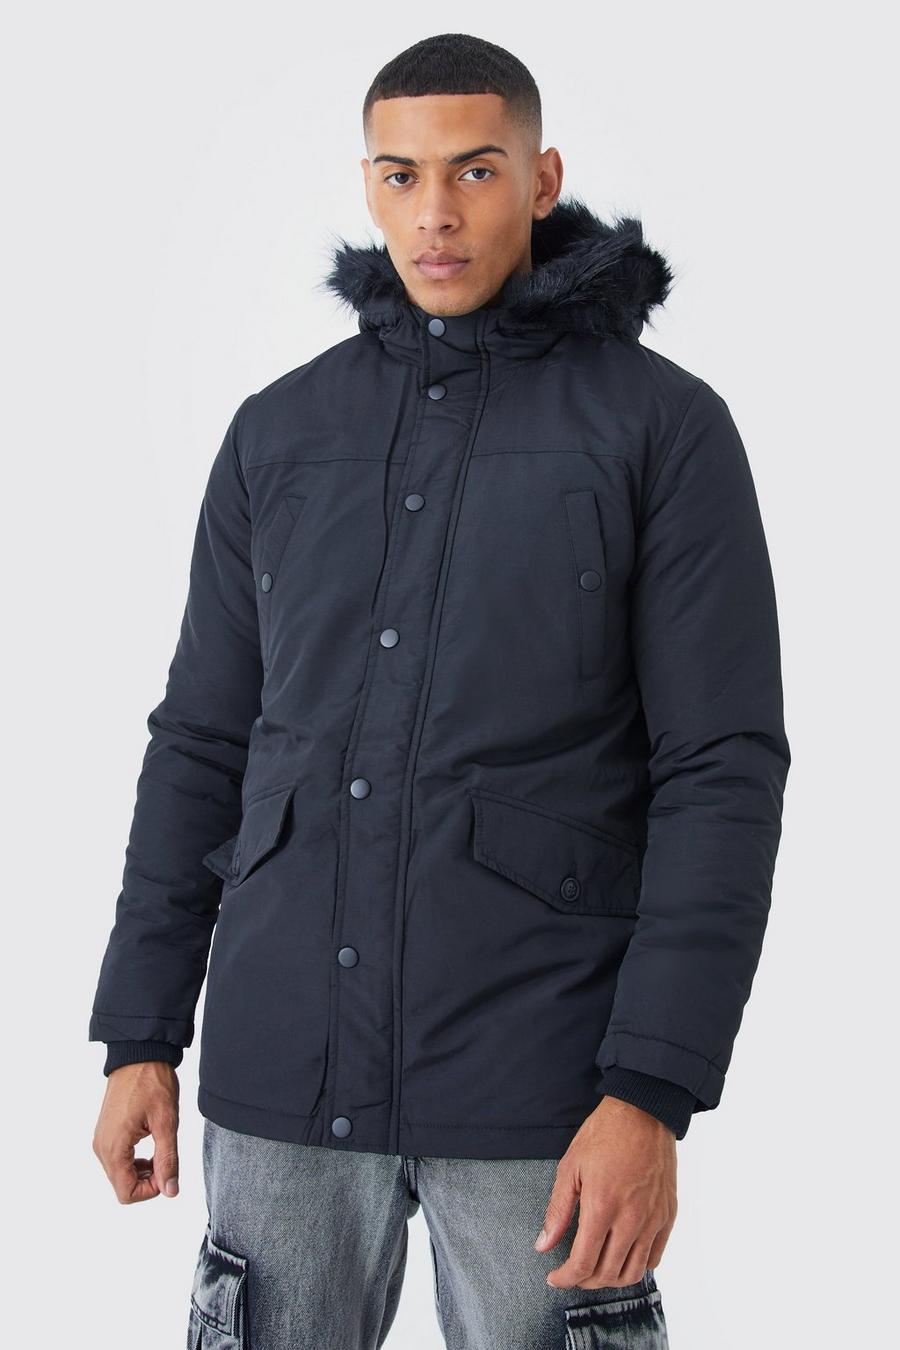 Black negro Hooded Parka With Faux Fur Trim Hood